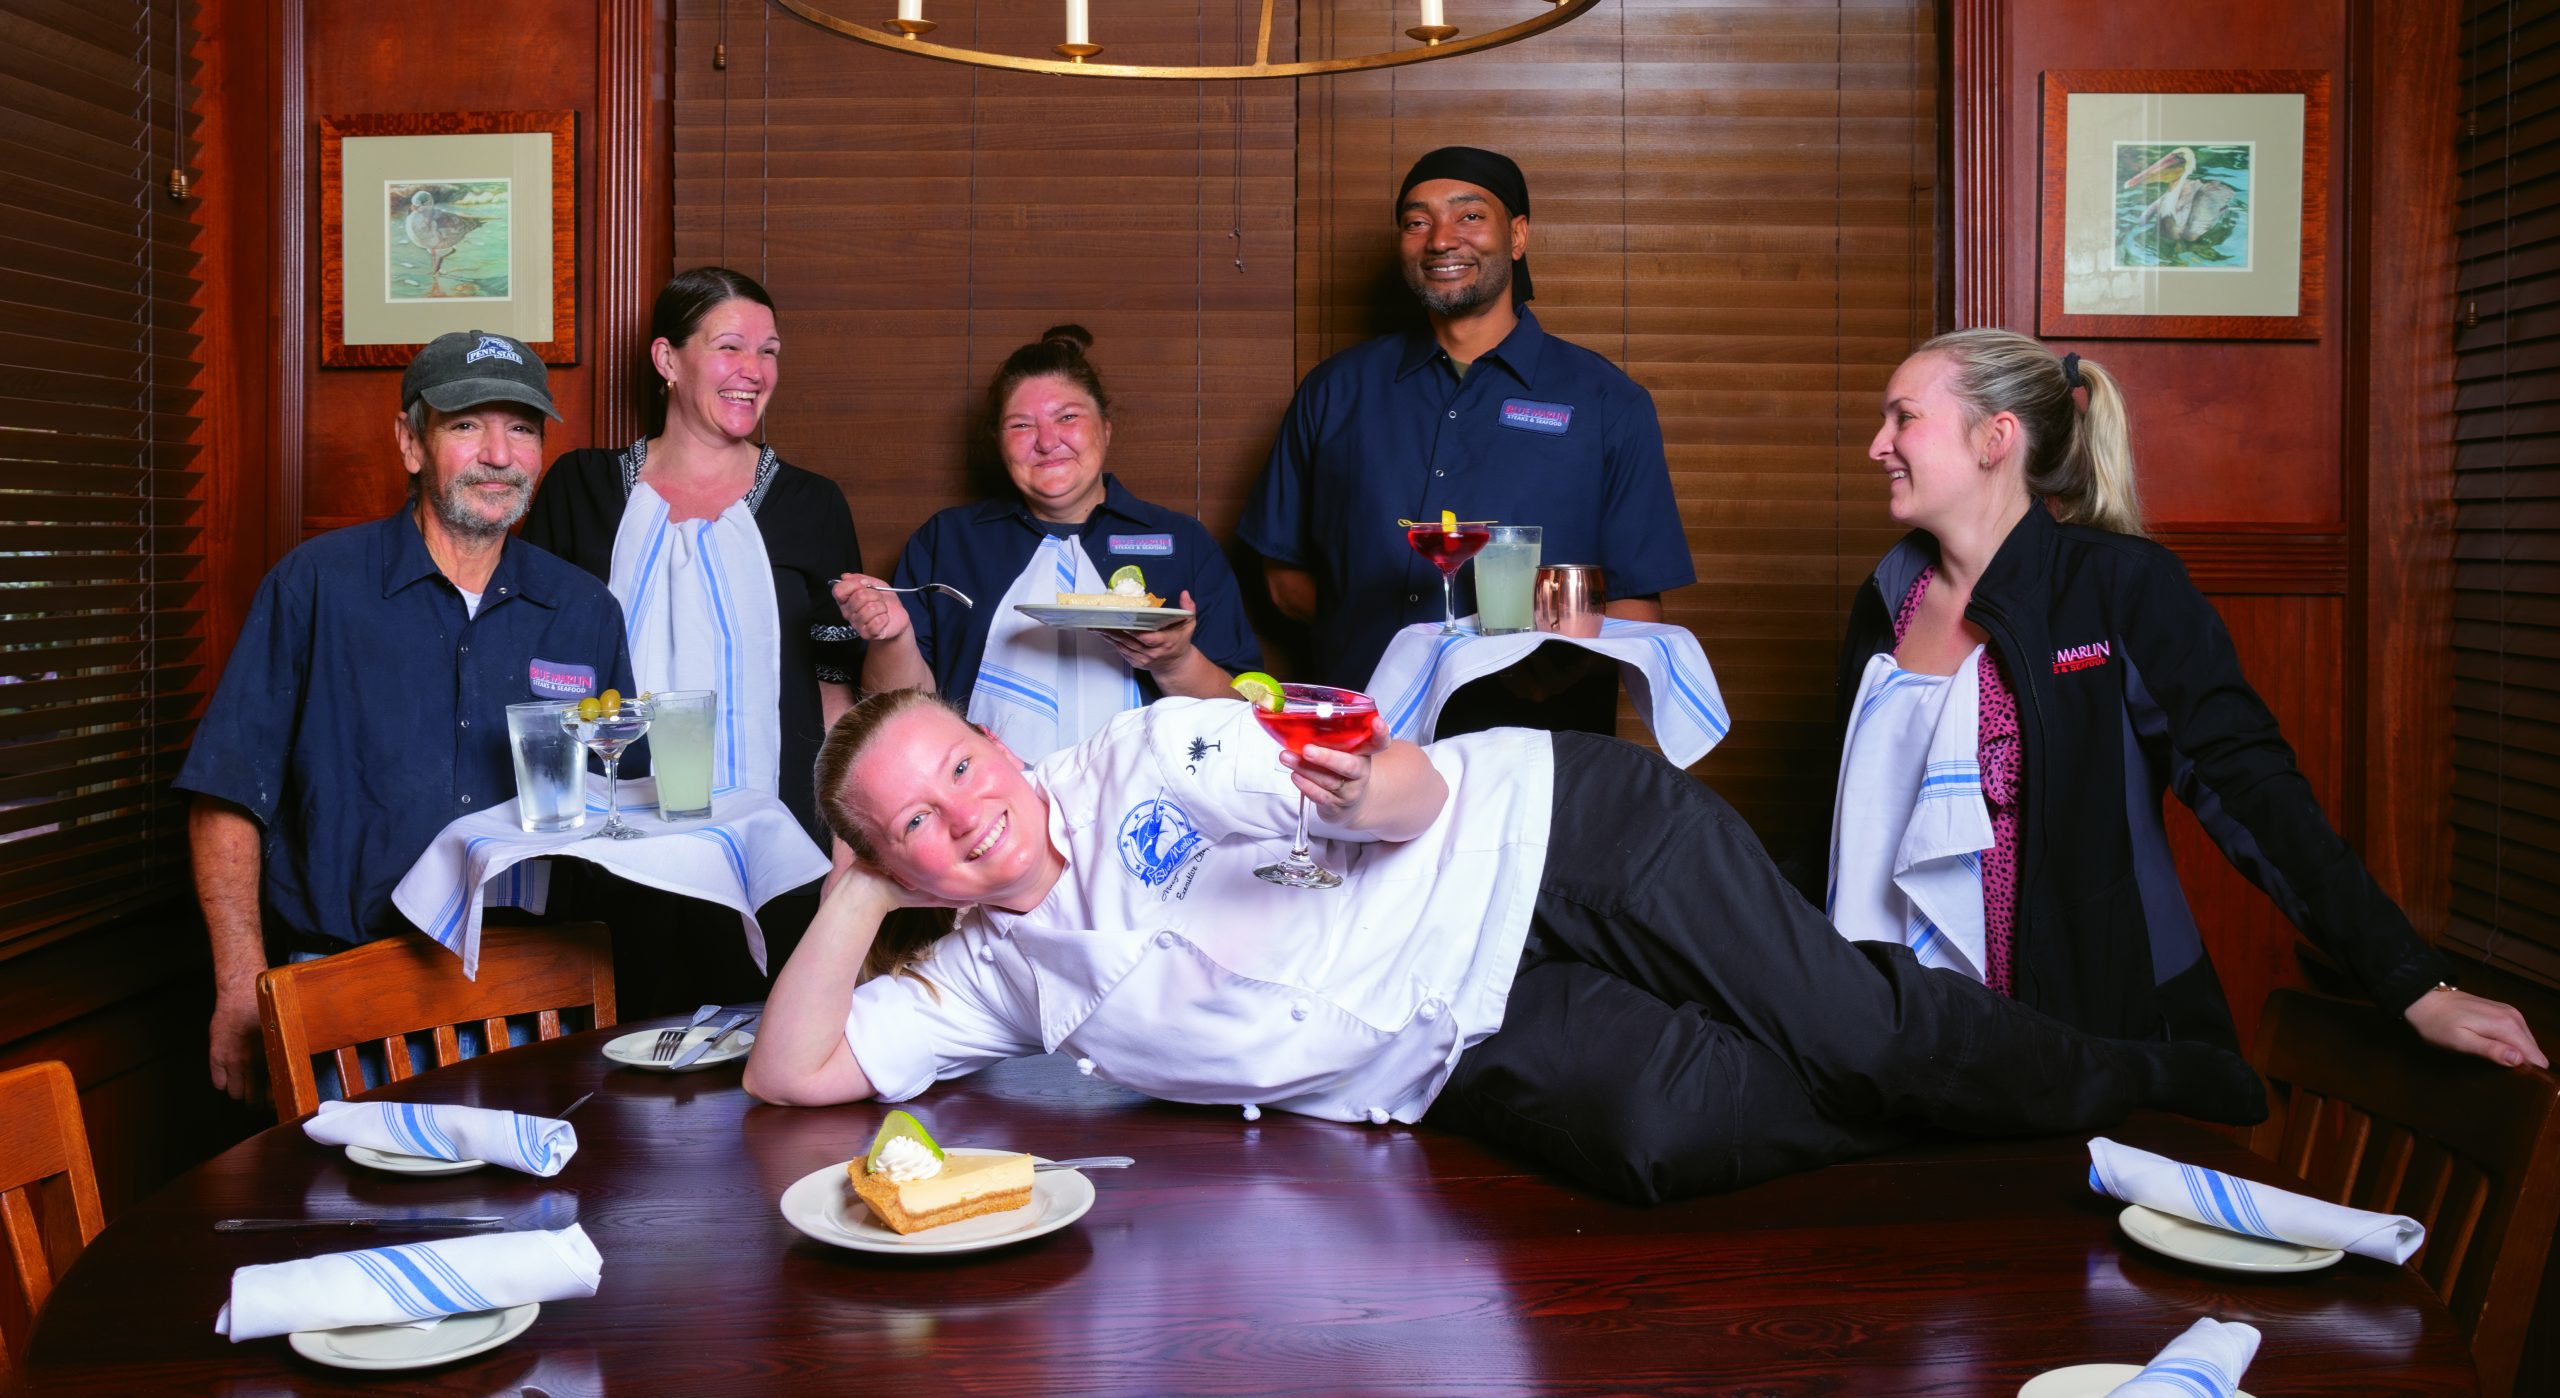 Voted Best Seafood and Best Shrimp & Grits, the Blue Marlin staff is toasting their success, serving the best Lowcountry inspired cuisine in town. Chef Maegan Horton, Curtis Shindledecker, Hilarie Price, Bambi Lamears, Anthony Fullwood, Rachel Hawkins.